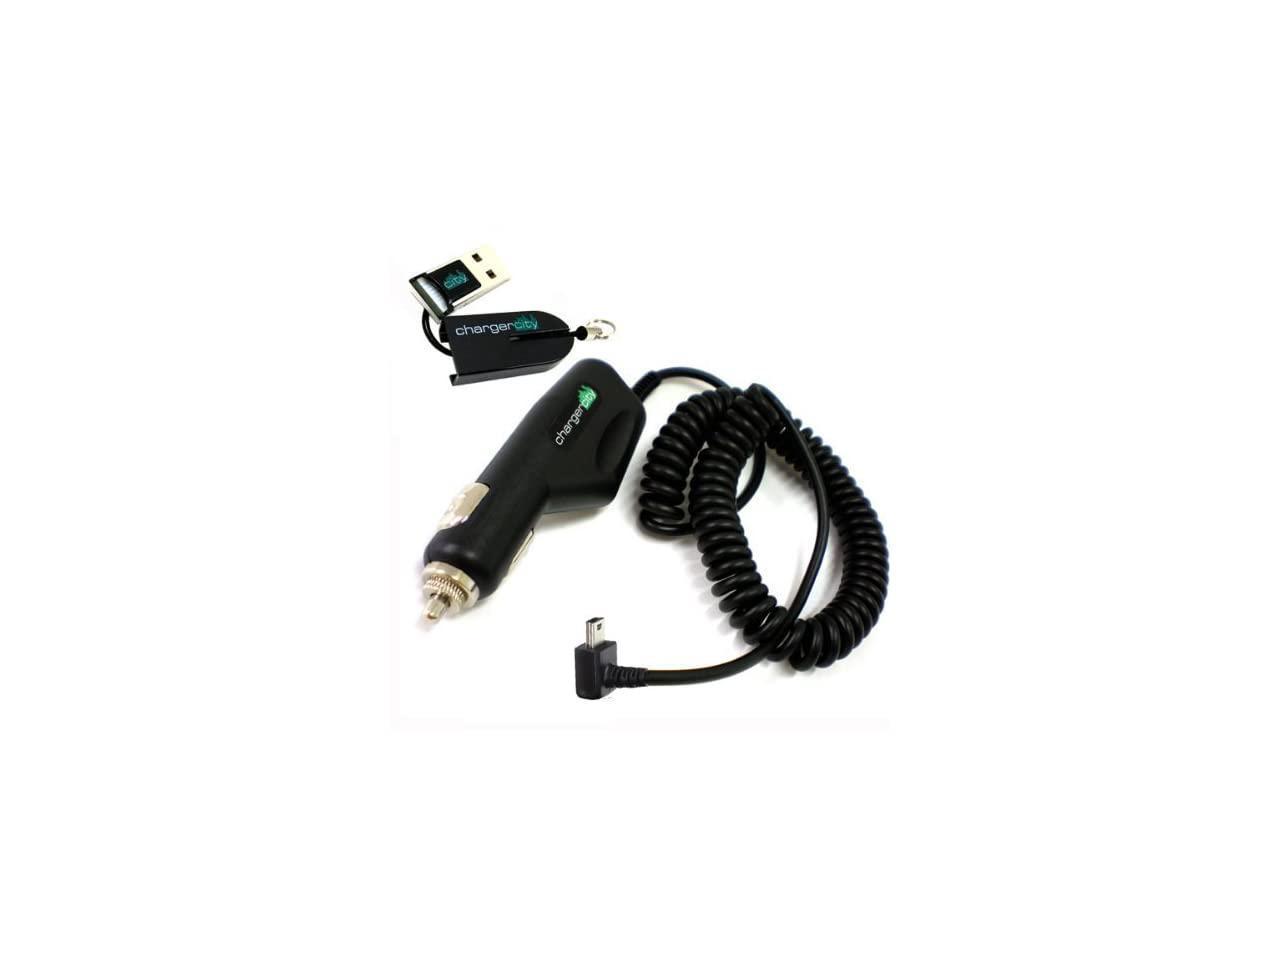 Car Power Adapter Cord Cable Charger Garmin nuvi GPS 2589 2599 2598 LMT LMTHD 